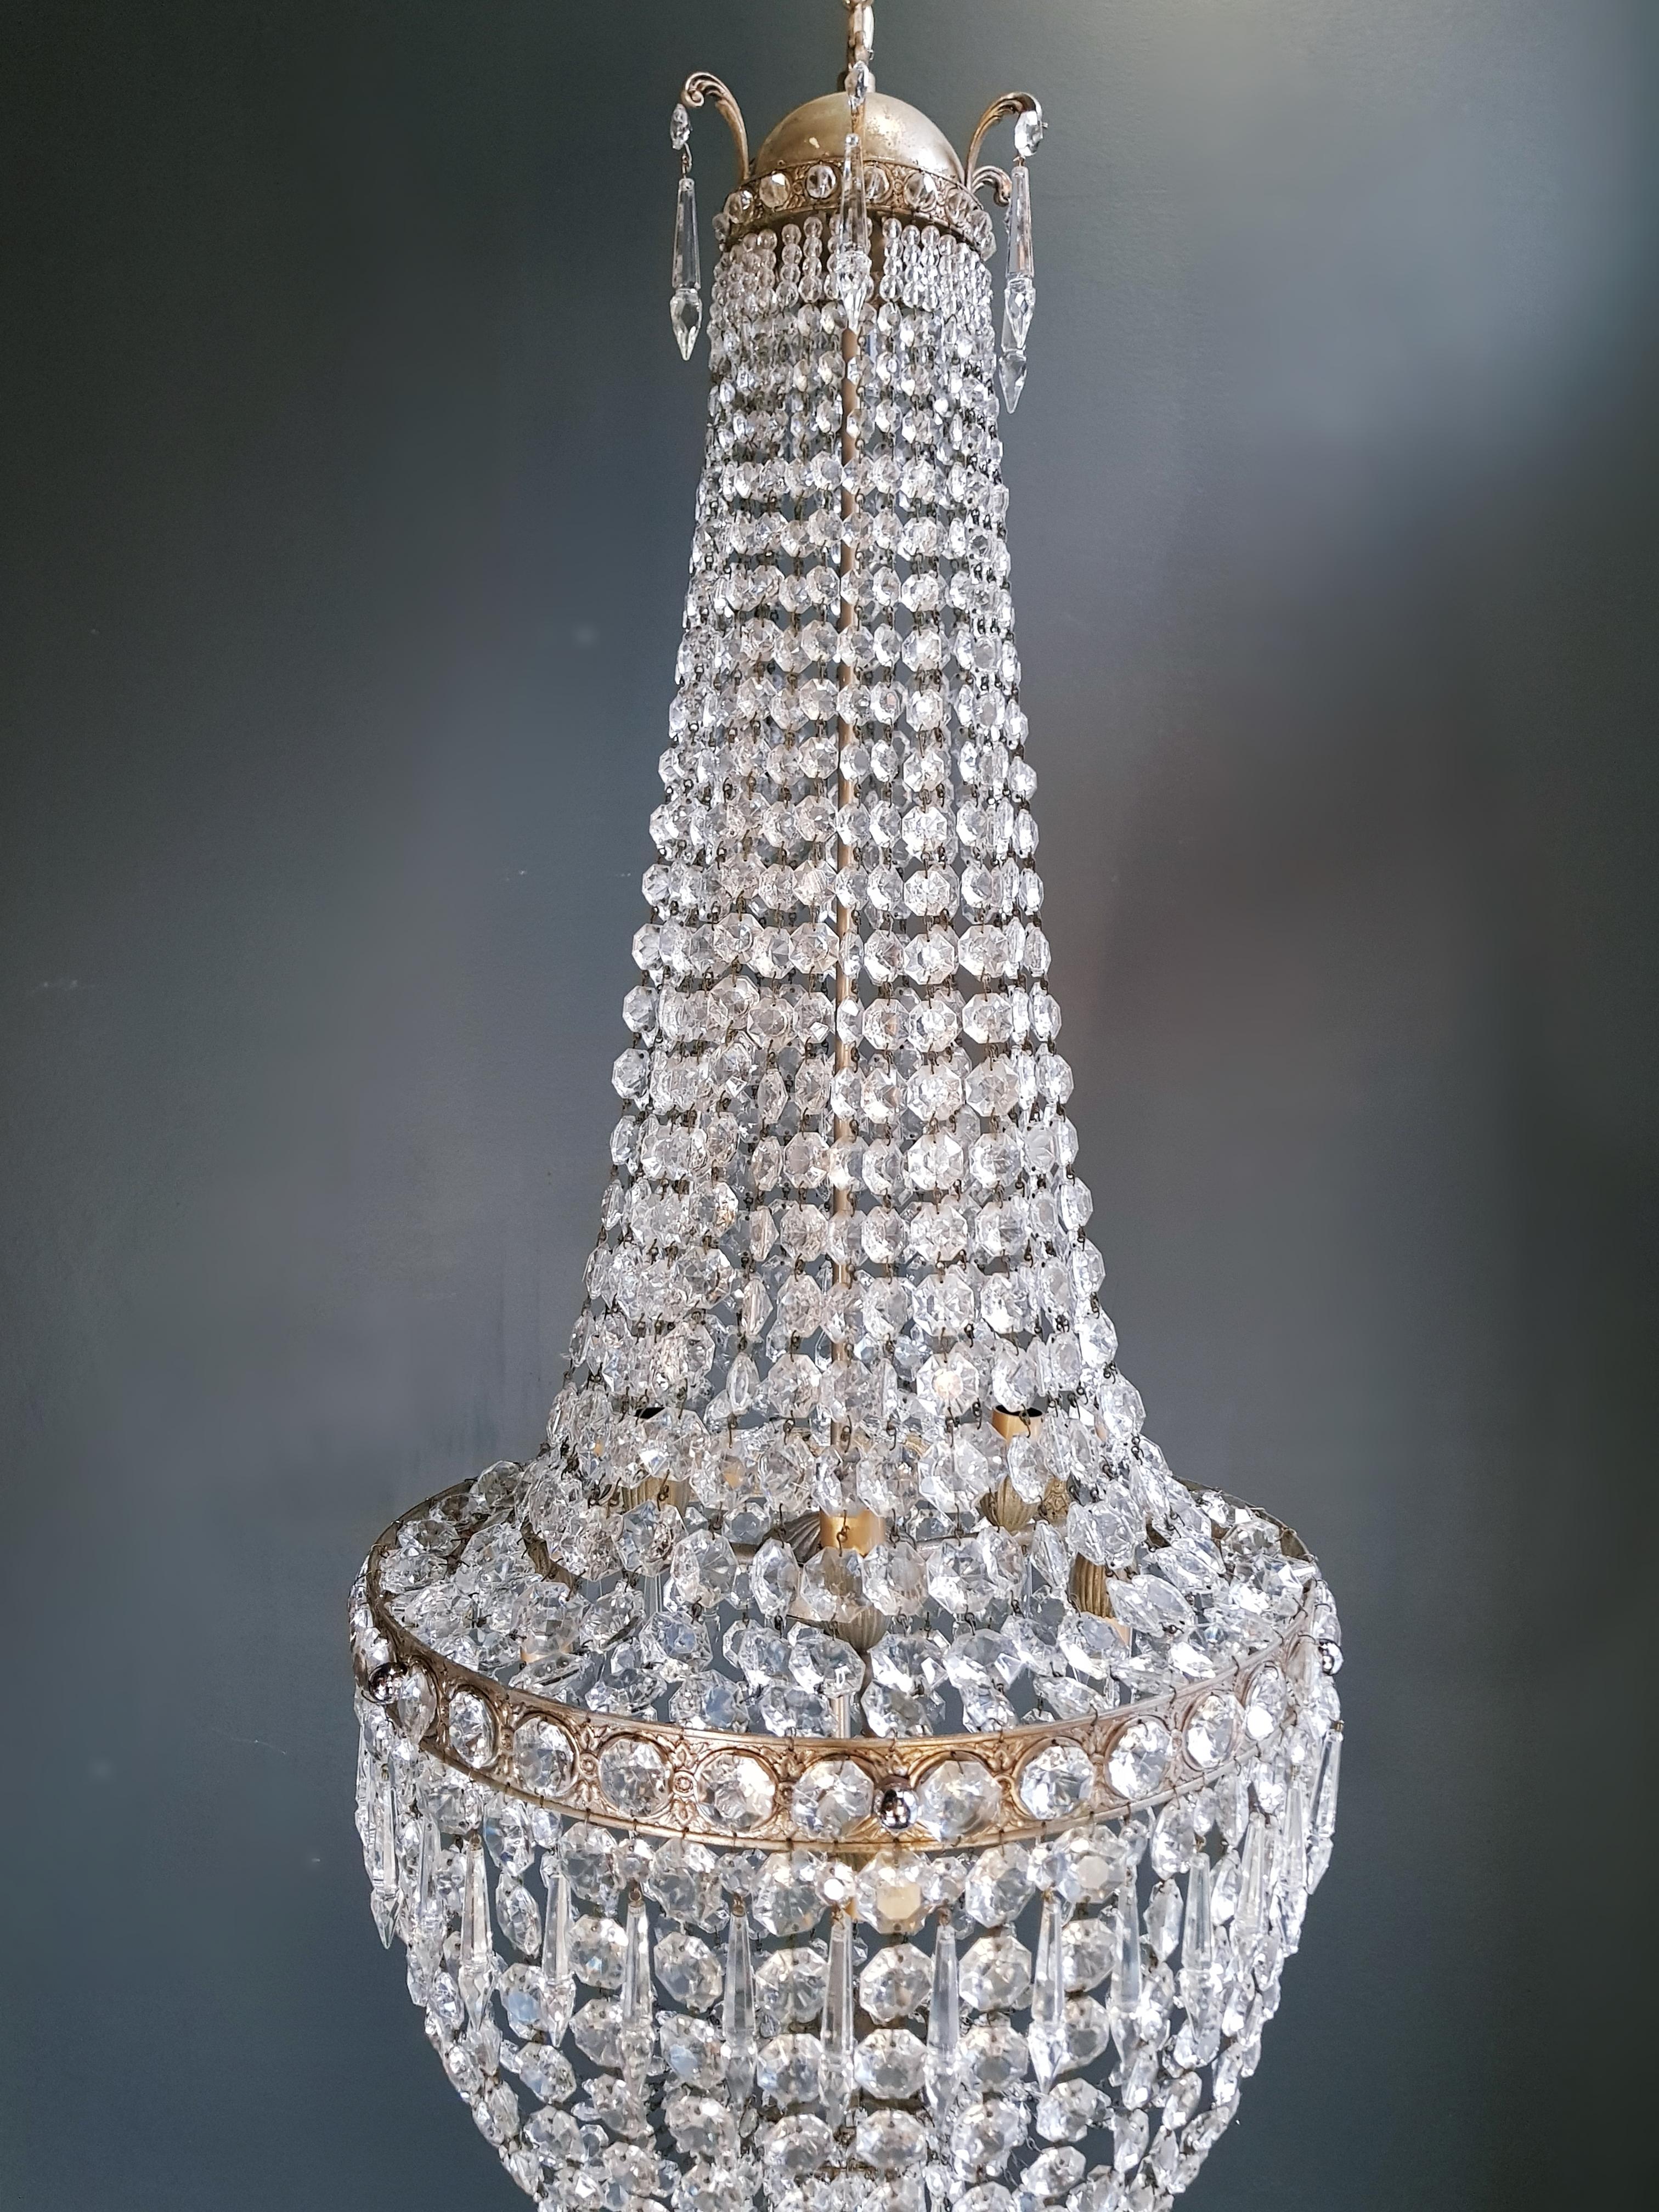 Mid-20th Century Montgolfièr Empire Sac a Pearl Chandelier Crystal Ceiling Lamp Pendant Lighting